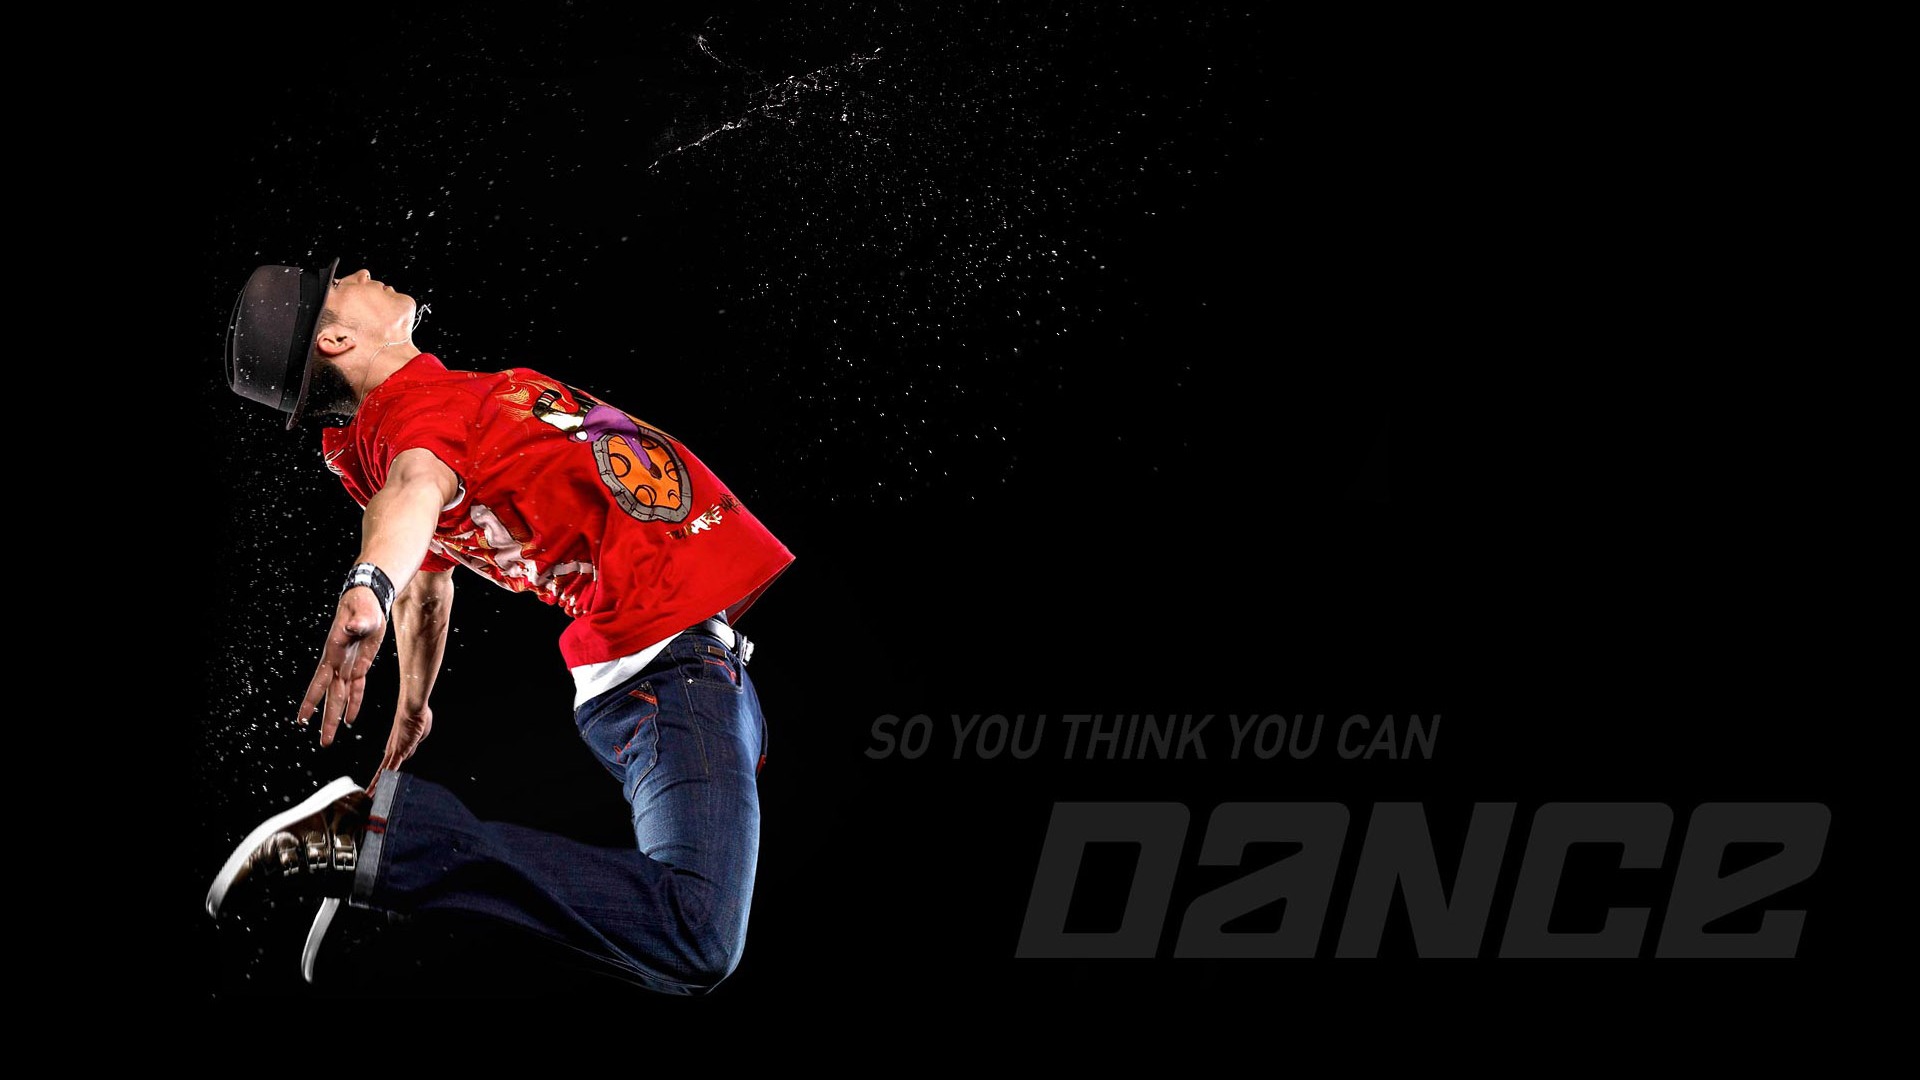 So You Think You Can Dance Wallpaper (1) #6 - 1920x1080